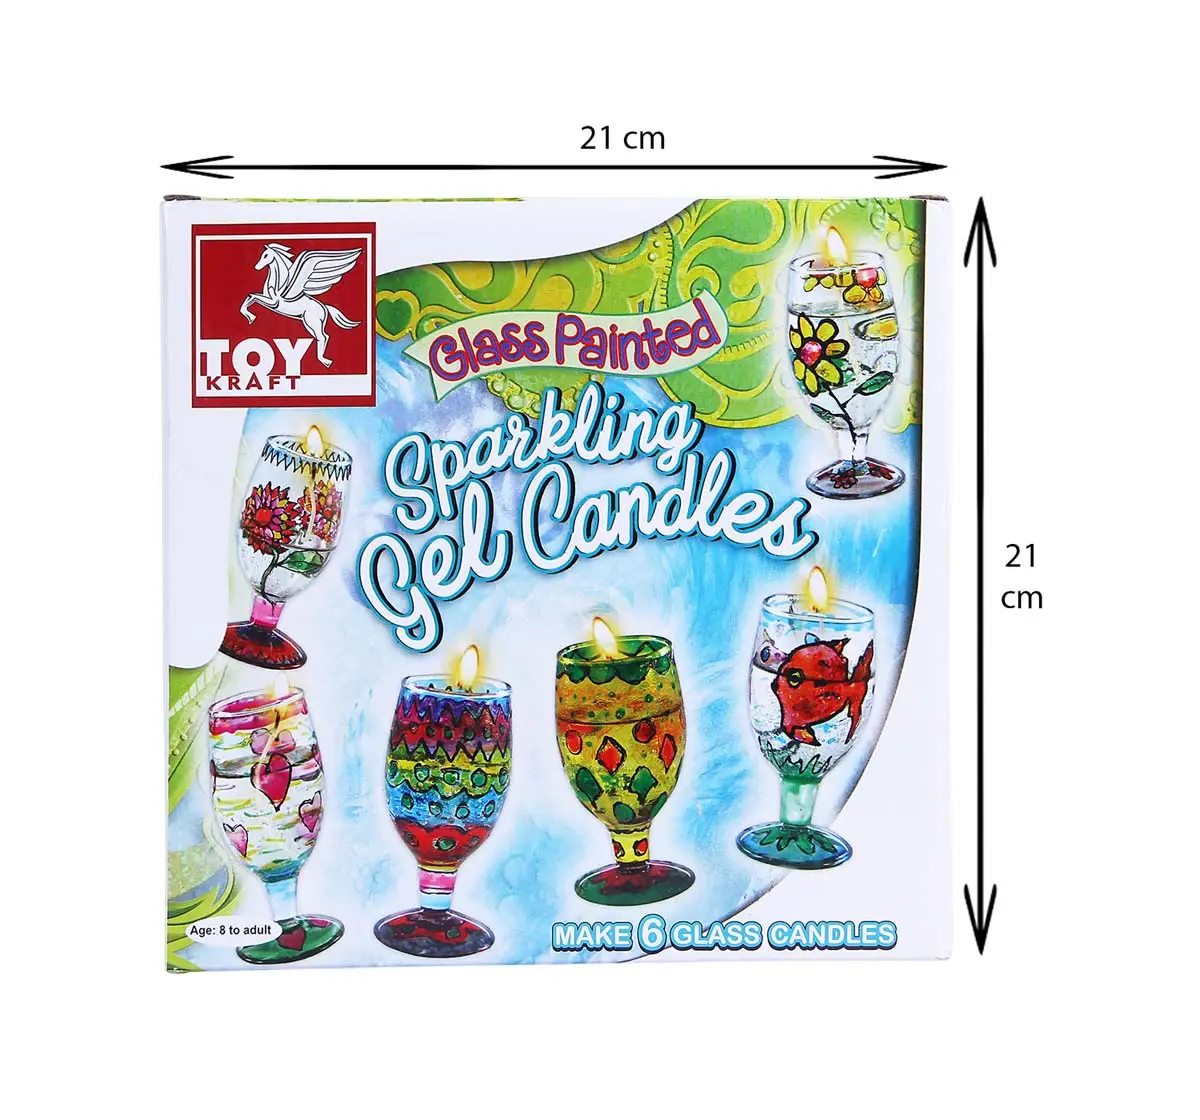 Toy Kraft Glass Painted Sparkling Gel Candles, Multicolor, 8Y+